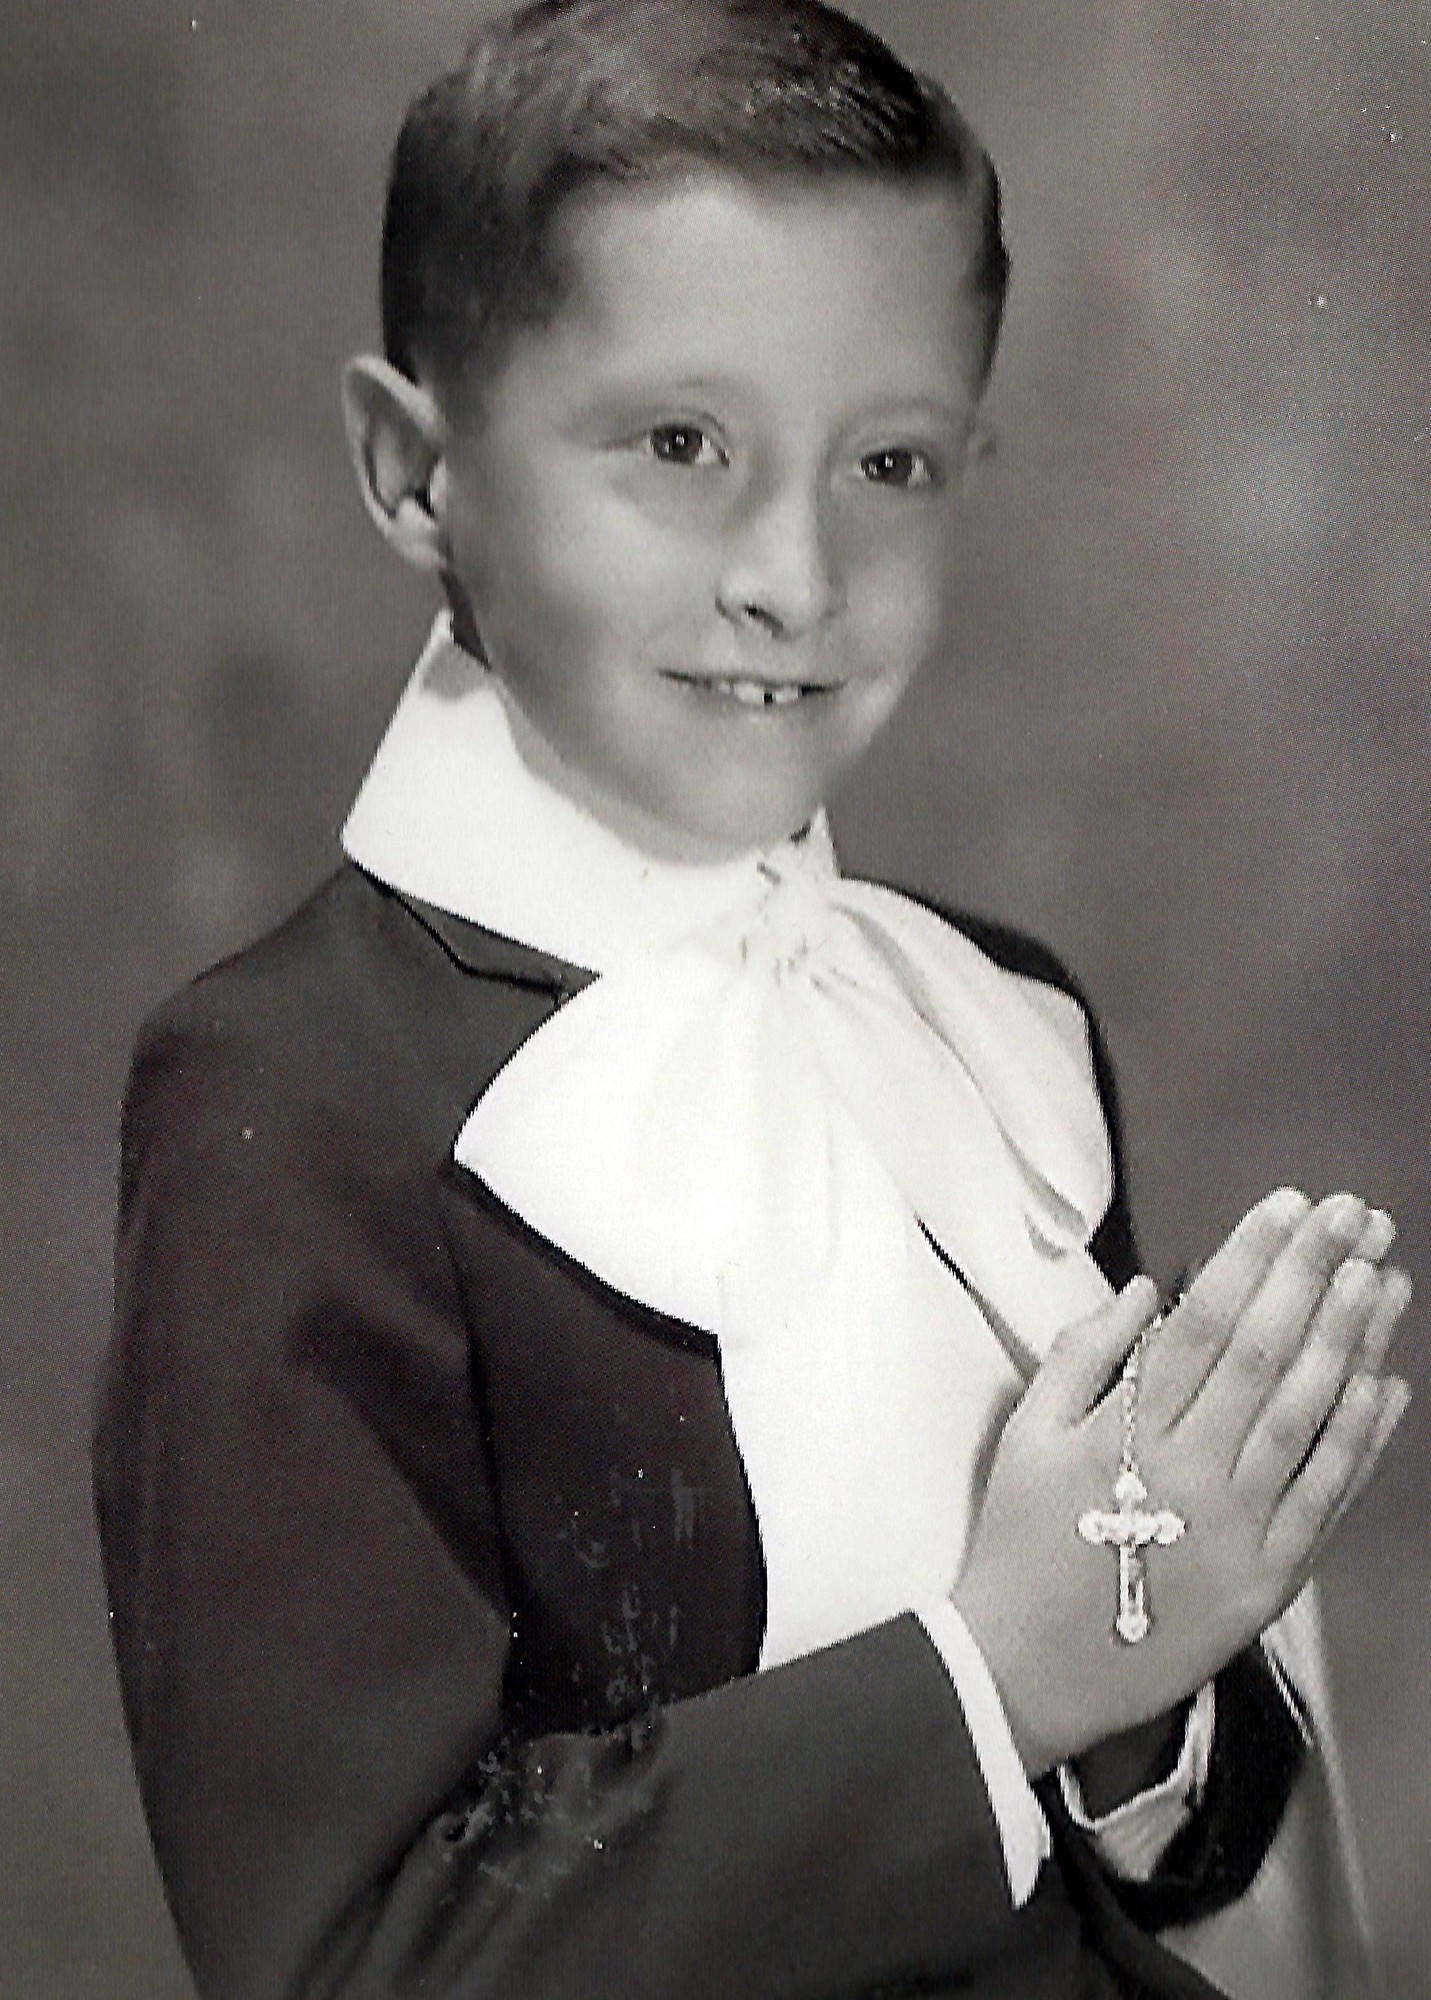 Father Frank made his First Holy Communion at Notre Dame church in New Hyde Park.